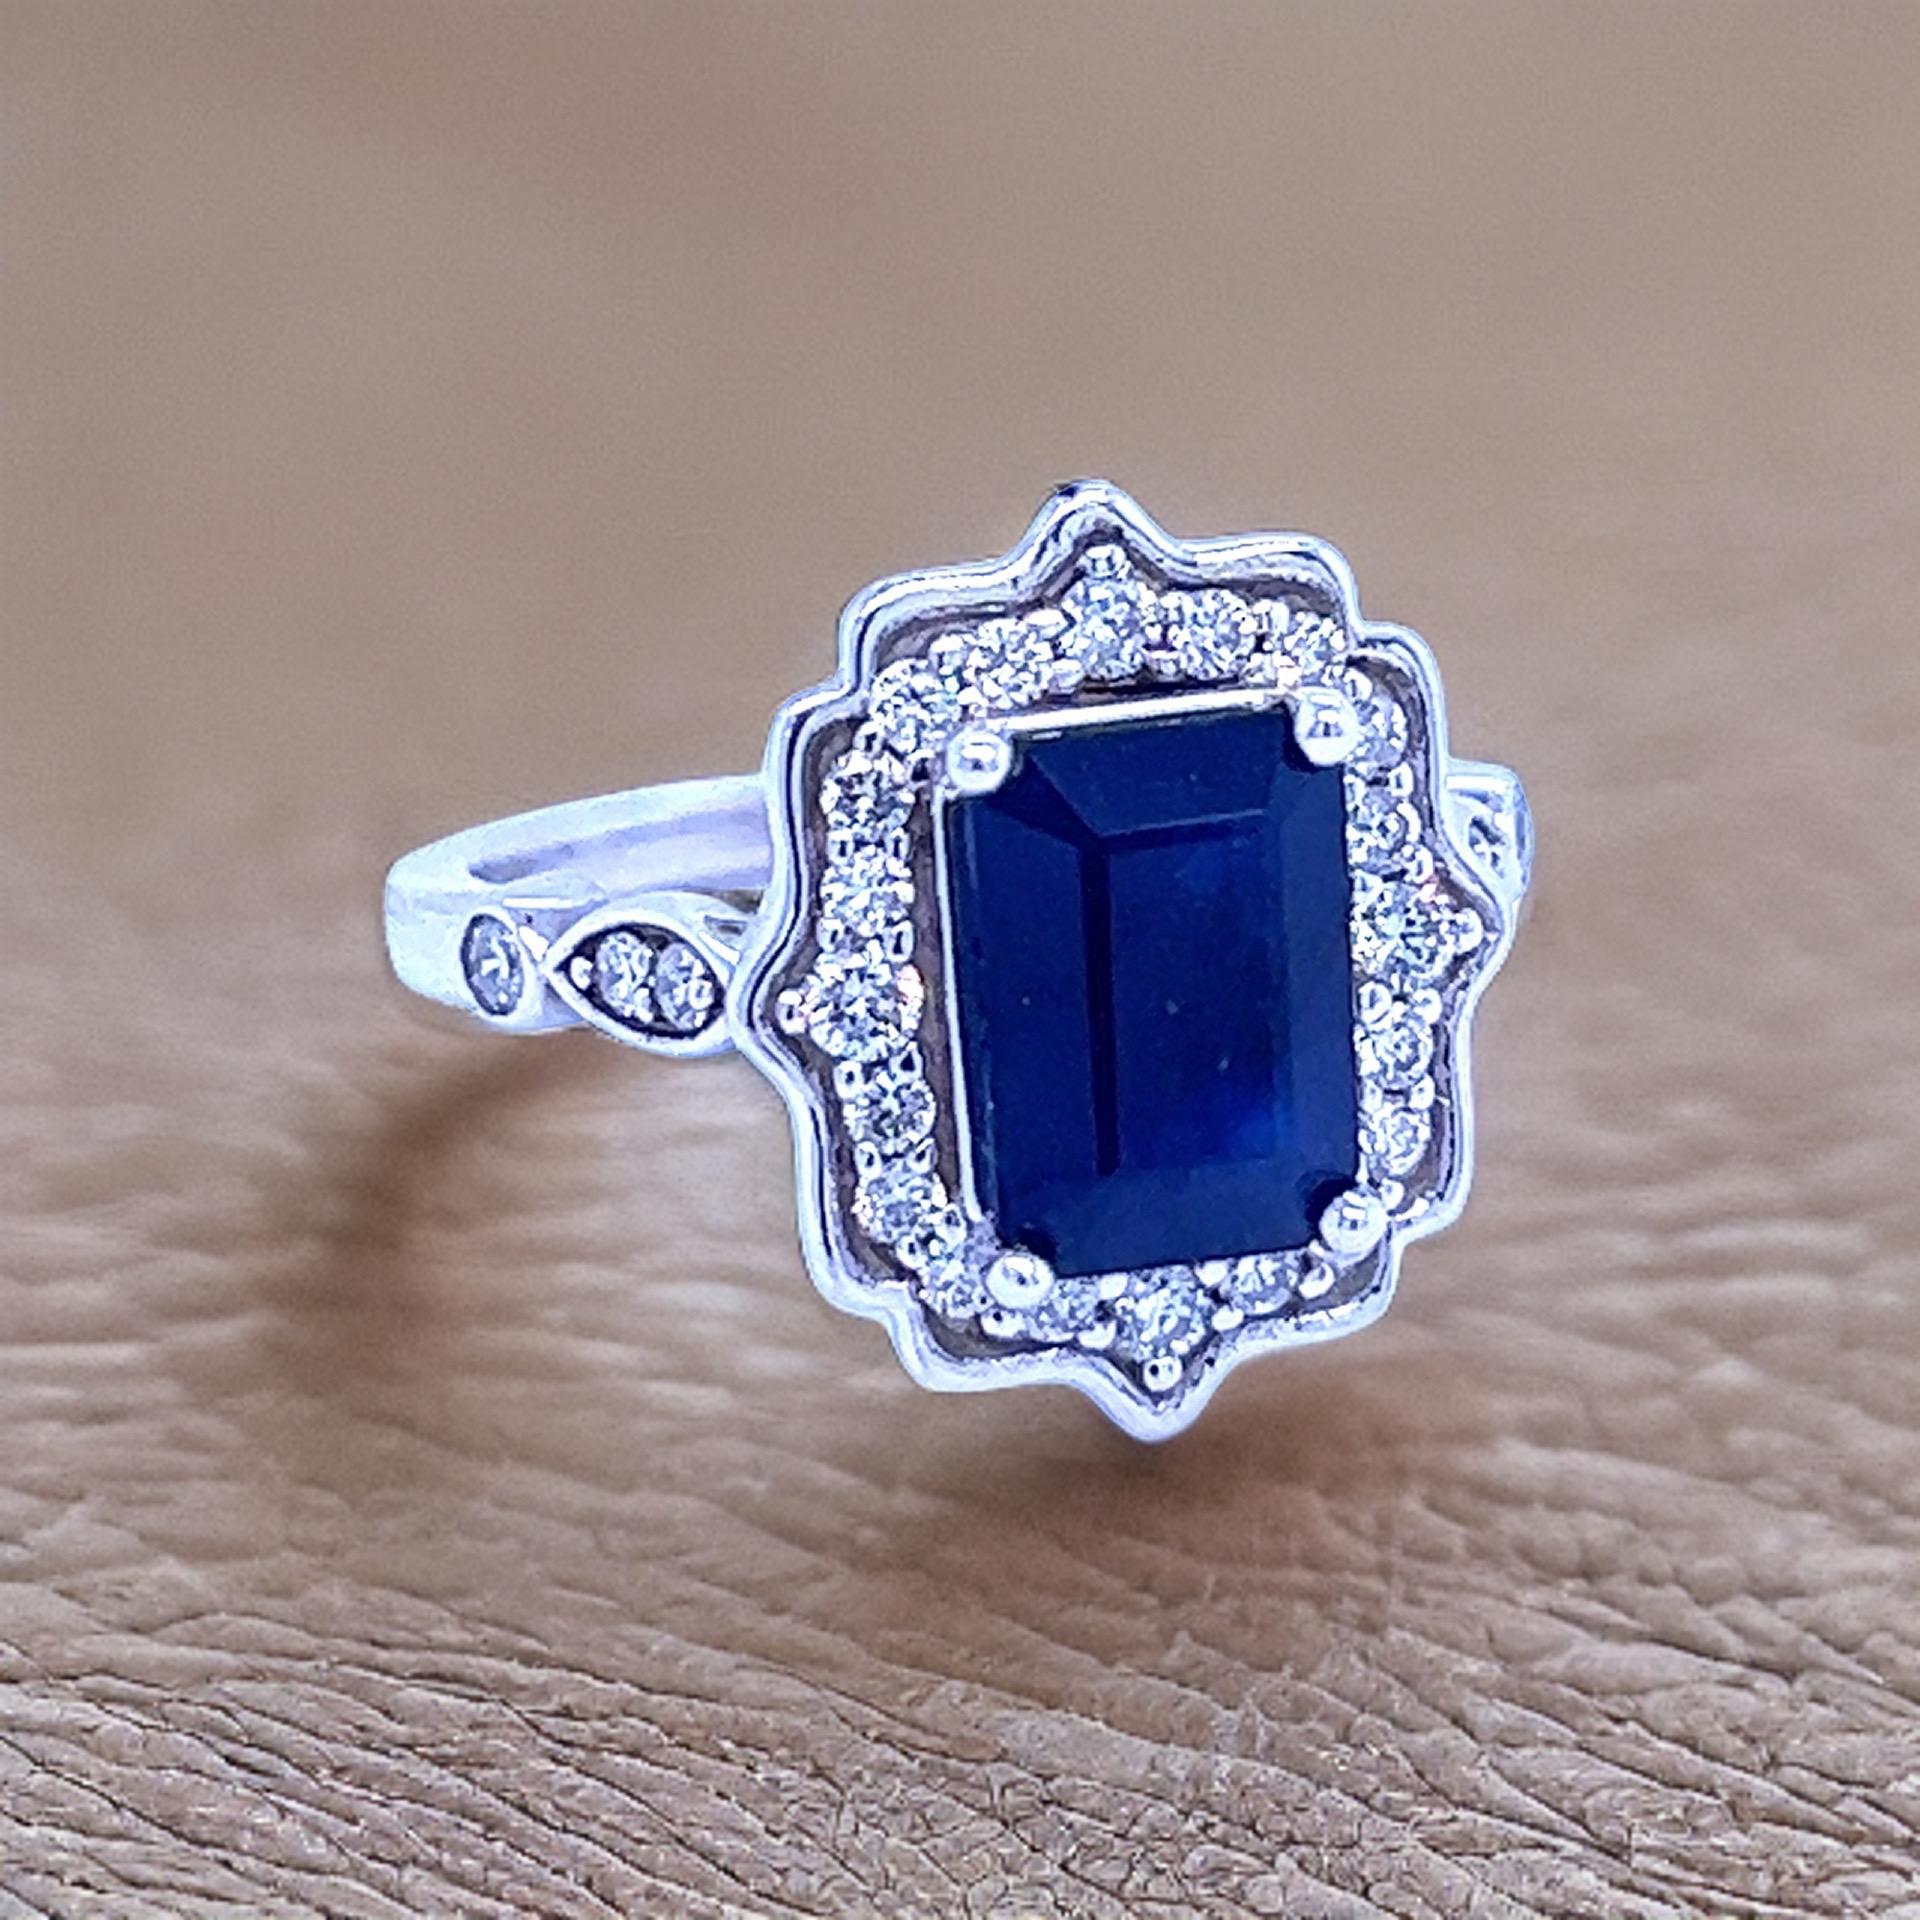 Natural Sapphire Diamond Ring 6.5 14k White Gold 3.51 TCW Certified In New Condition For Sale In Brooklyn, NY